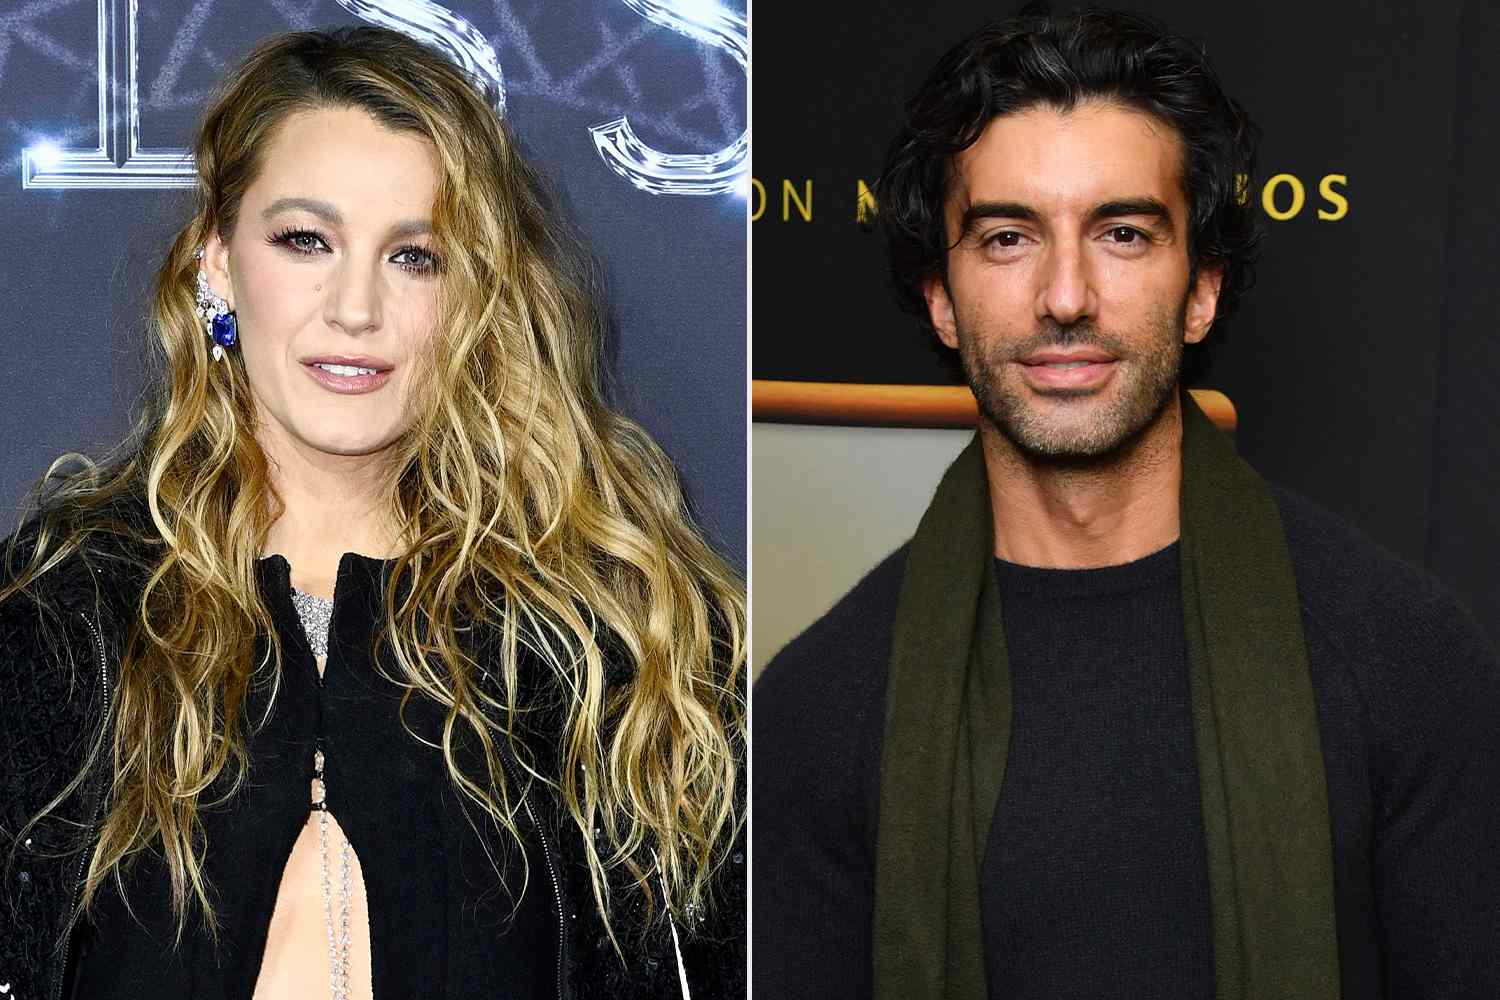 Blake Lively and Justin Baldoni Get Steamy in New Trailer for 'It Ends with Us'